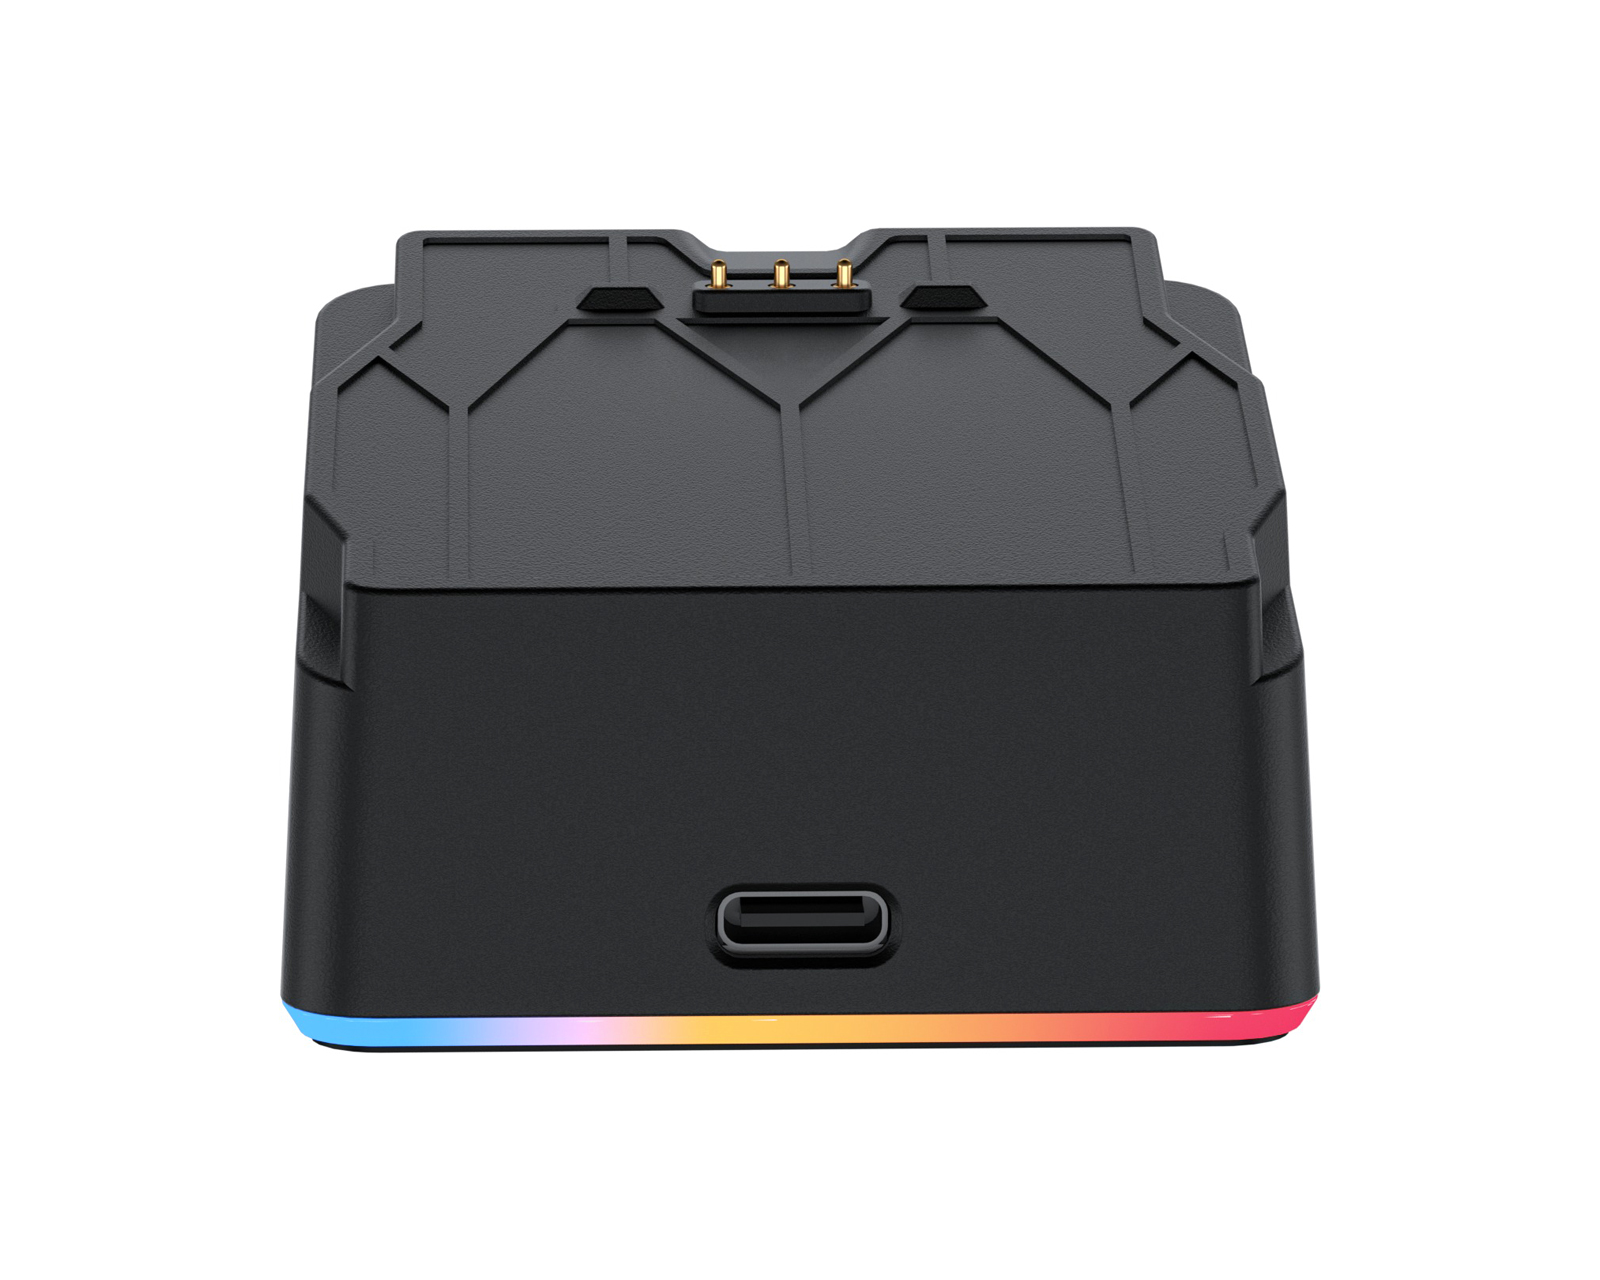 BIGBIG WON Rainbow 2 Pro Wireless Controller with Charging Stand